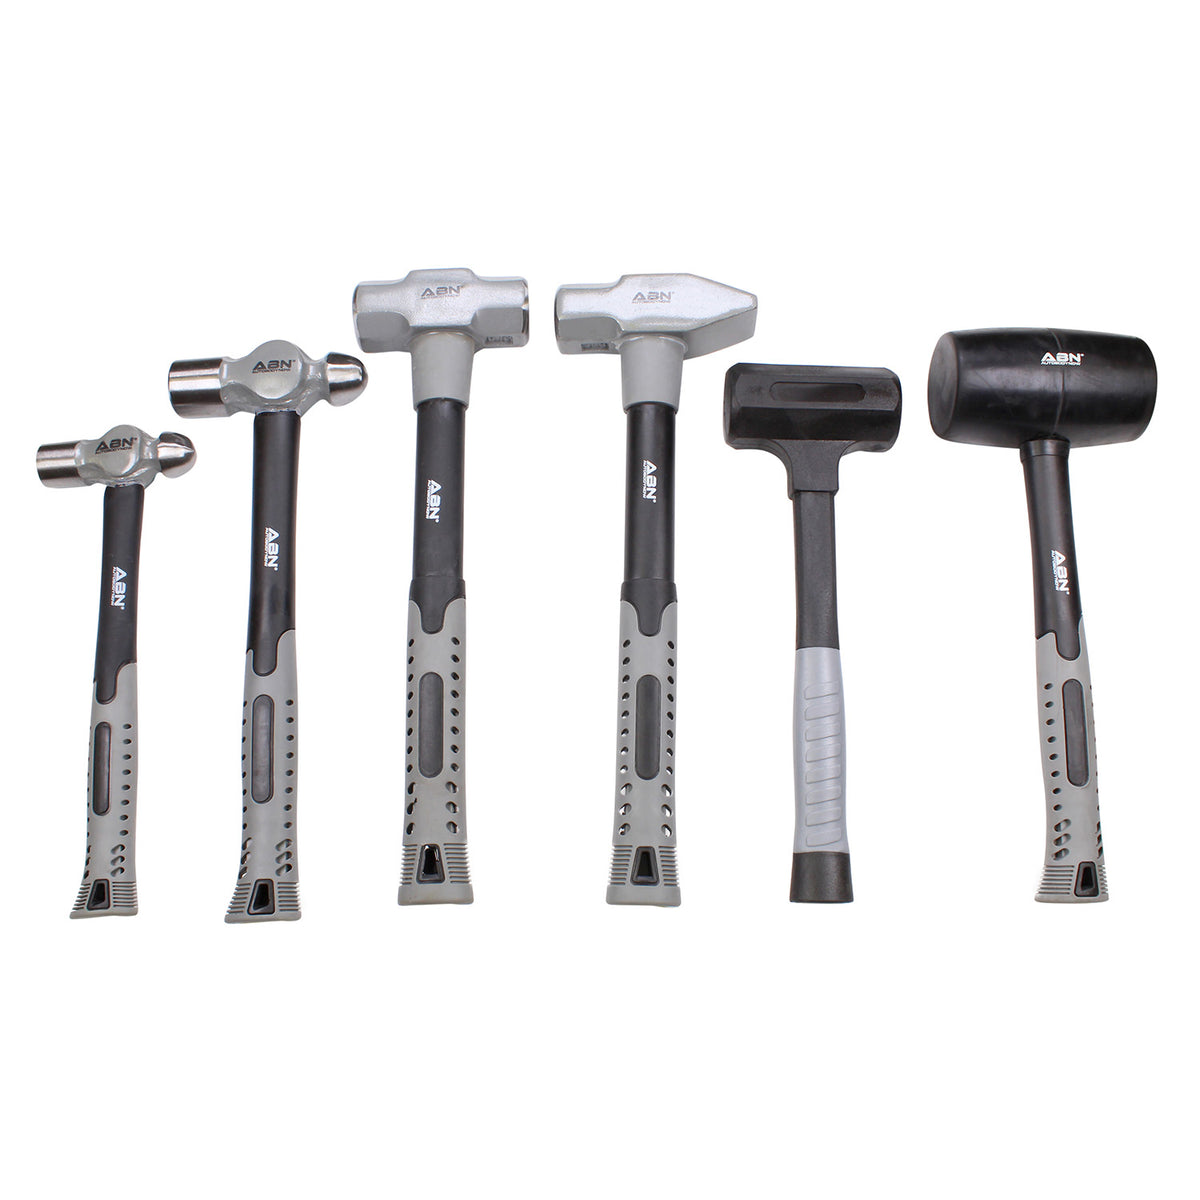 6 Piece Hammer Set - Hammer Tool Set Metal Working Tools and Equipment